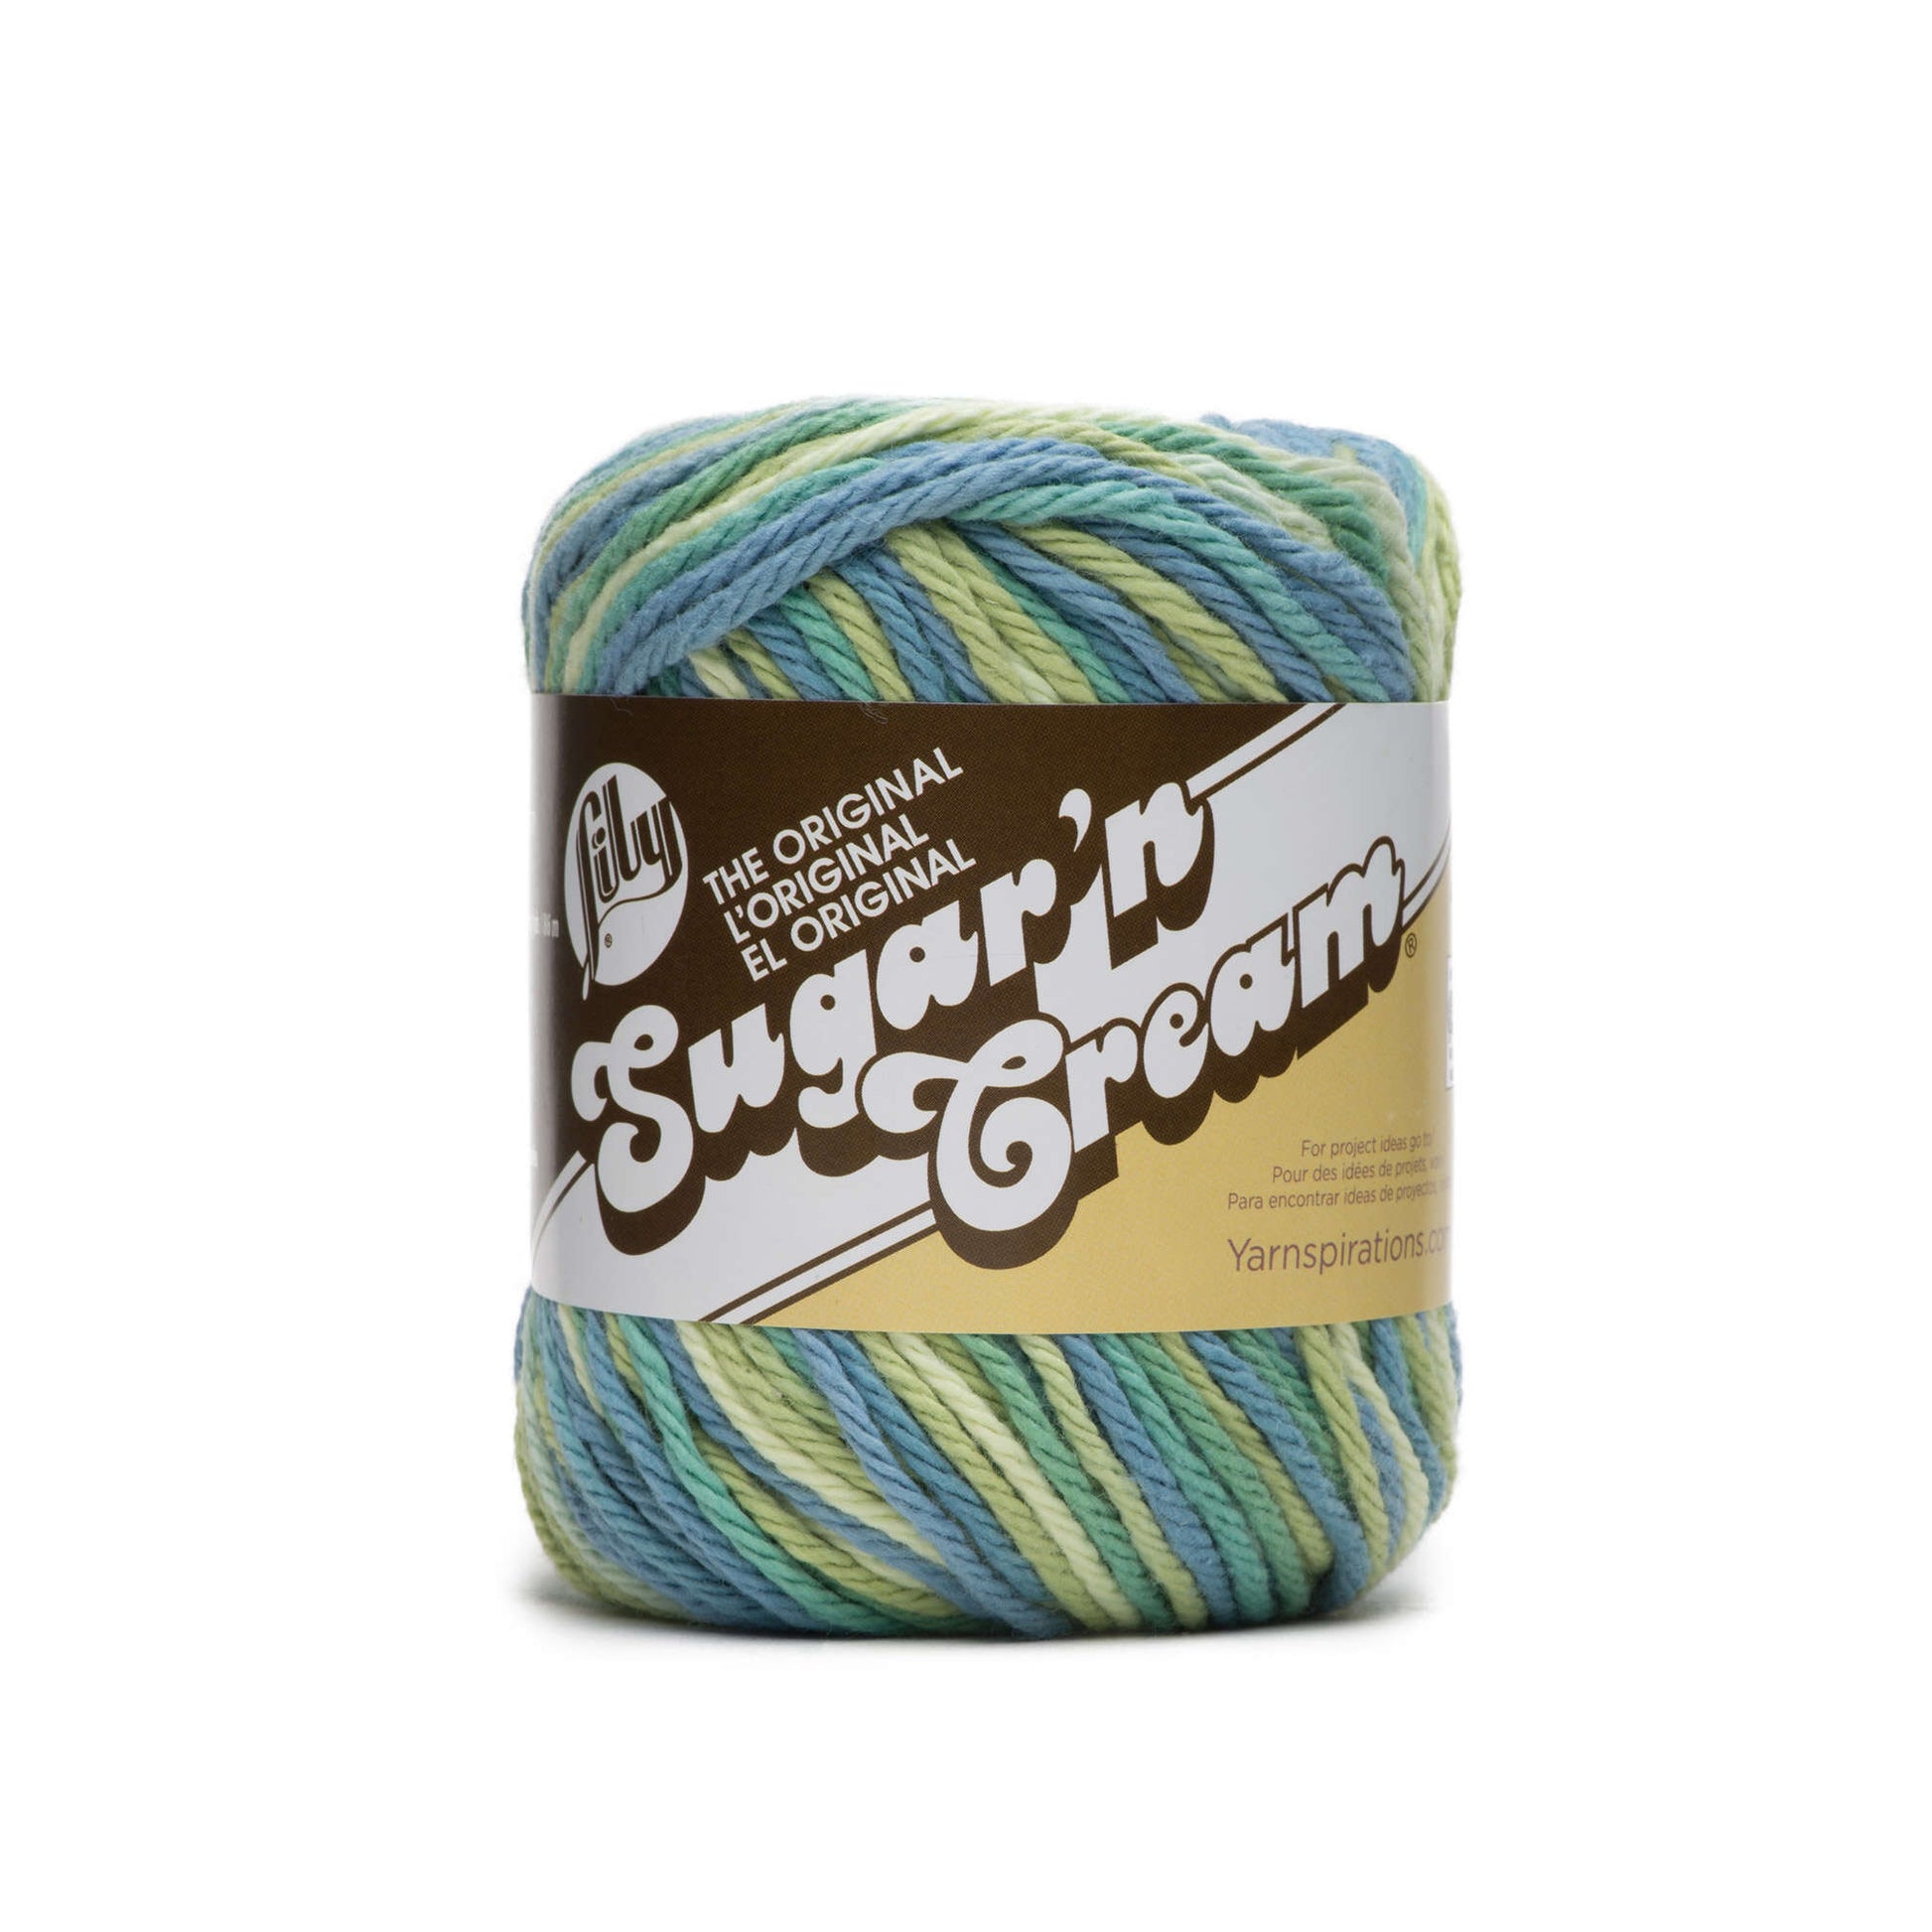 Lily Sugar'n Cream Ombres Yarn Waterfront Ombre